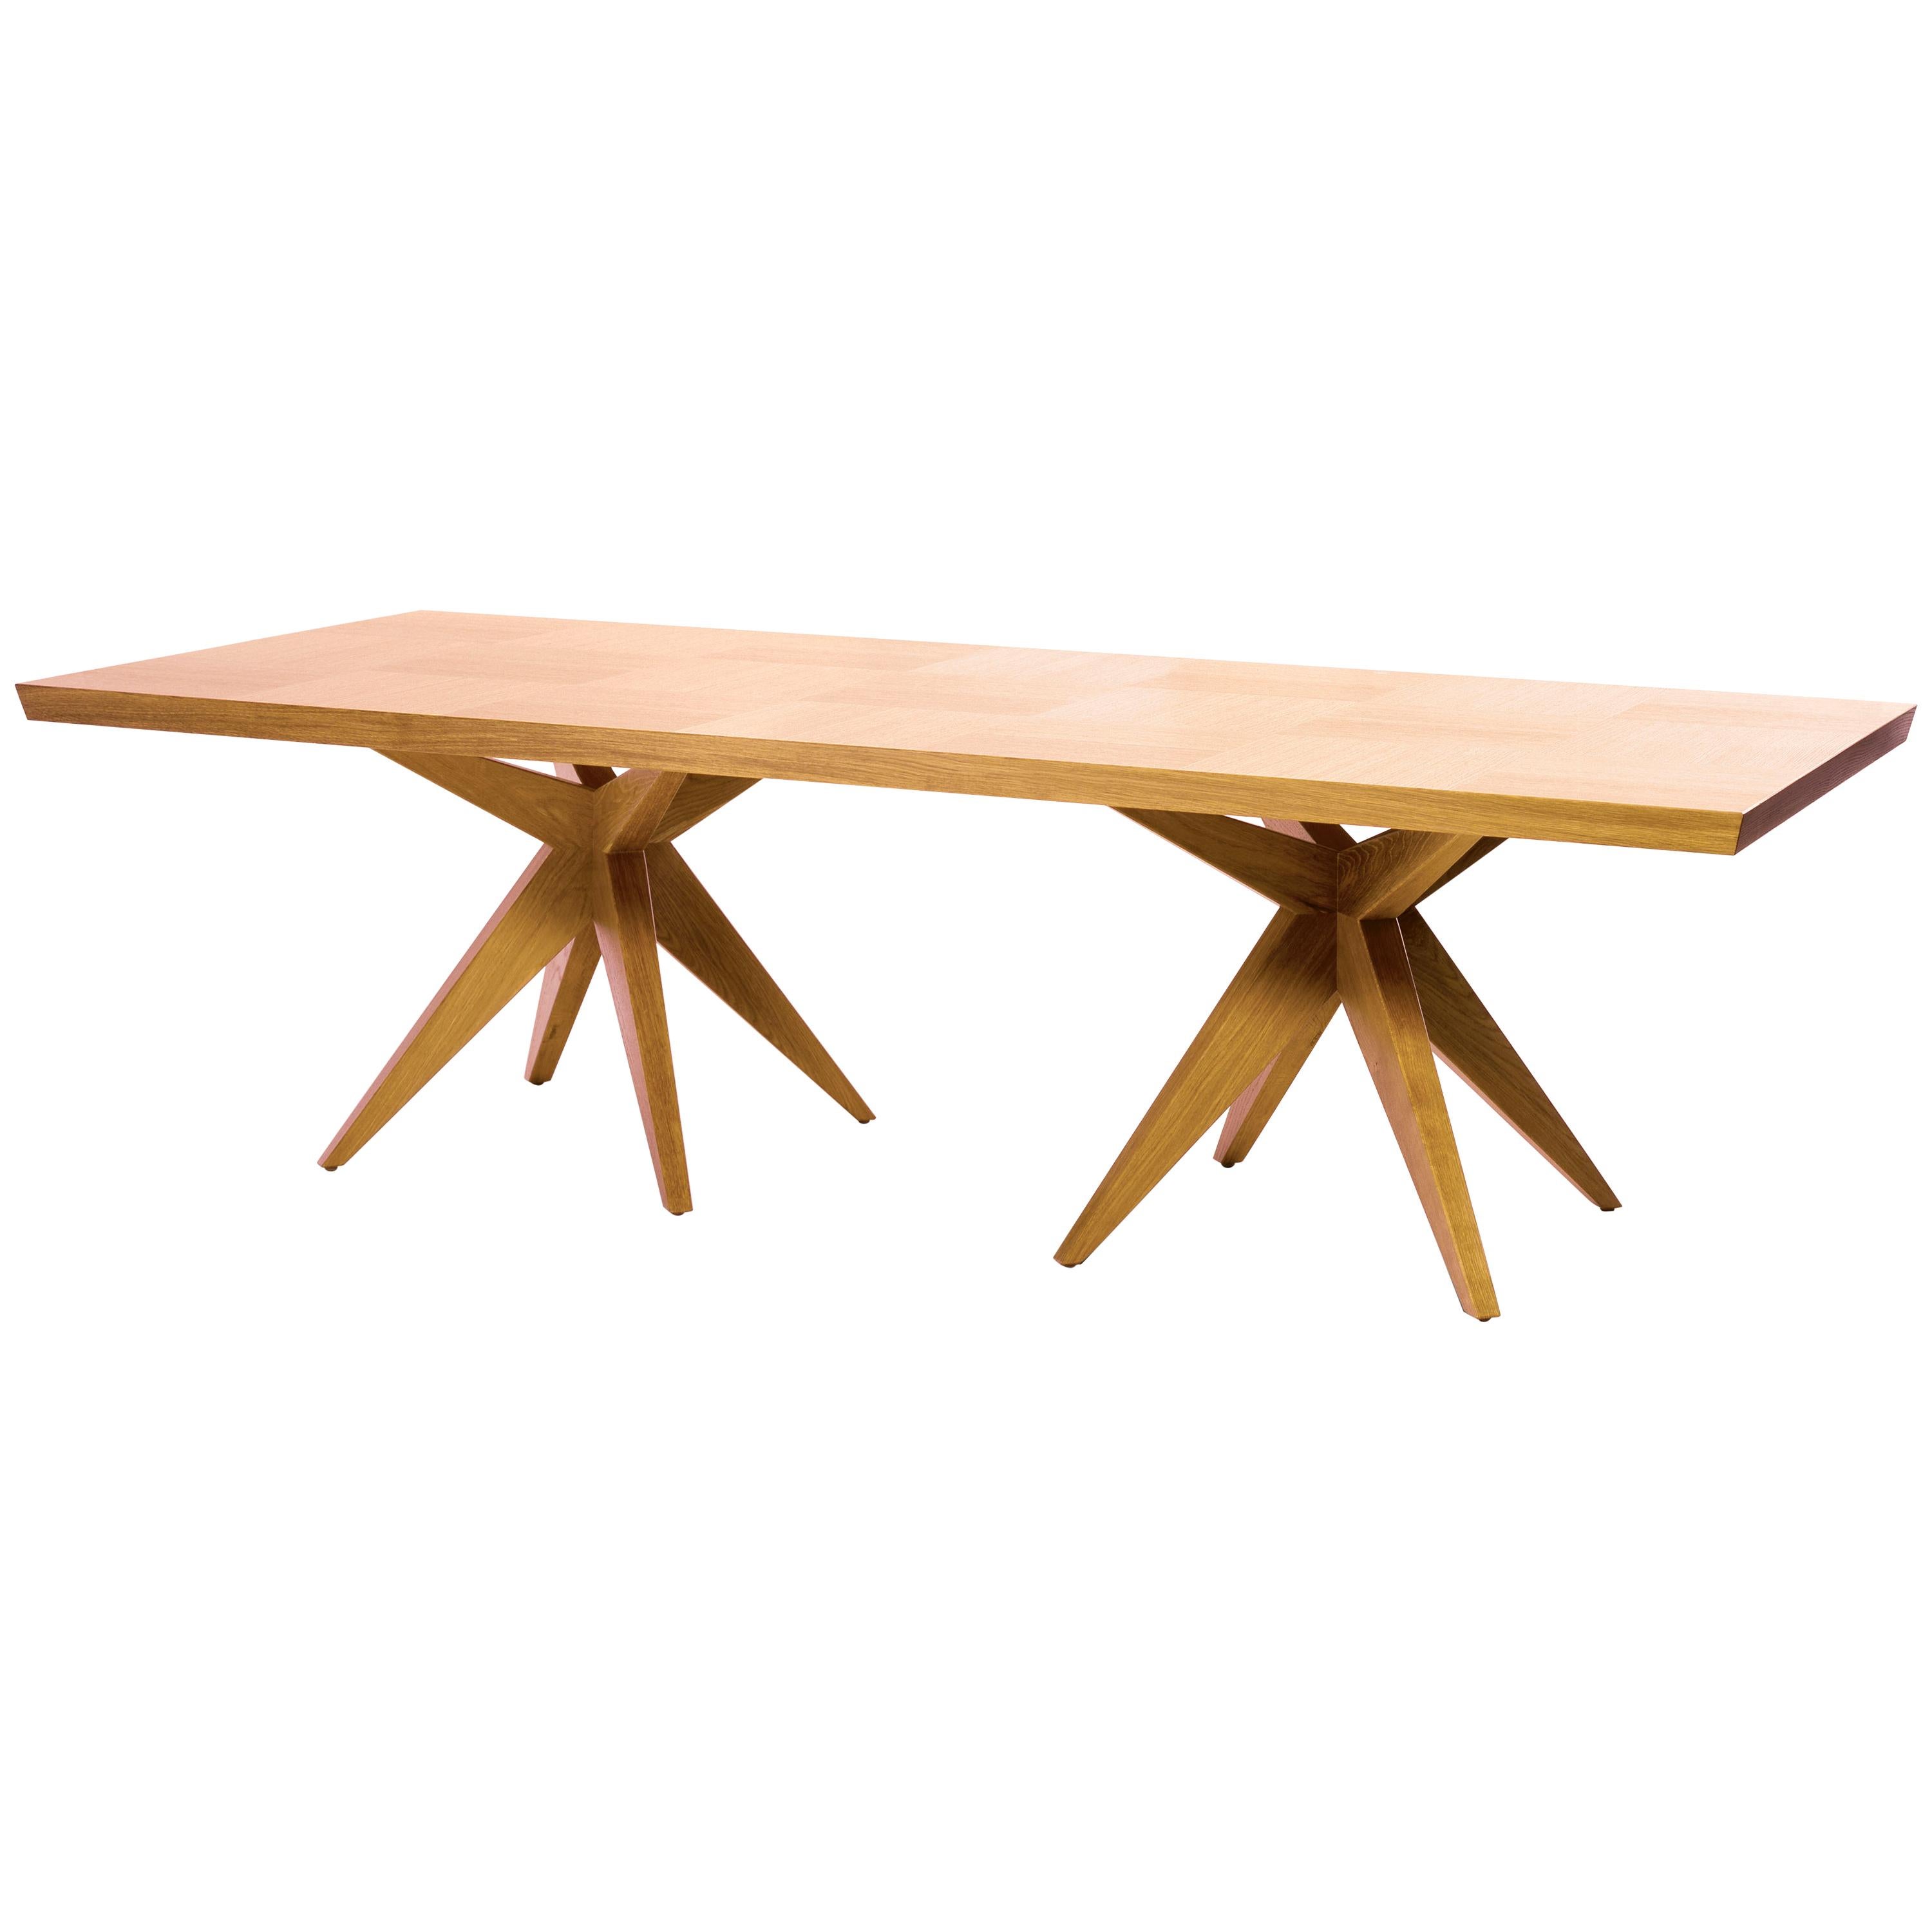 Angela Adams Double Bonfire Dining Table, Ash, Seats 12, Handcrafted, Modern For Sale